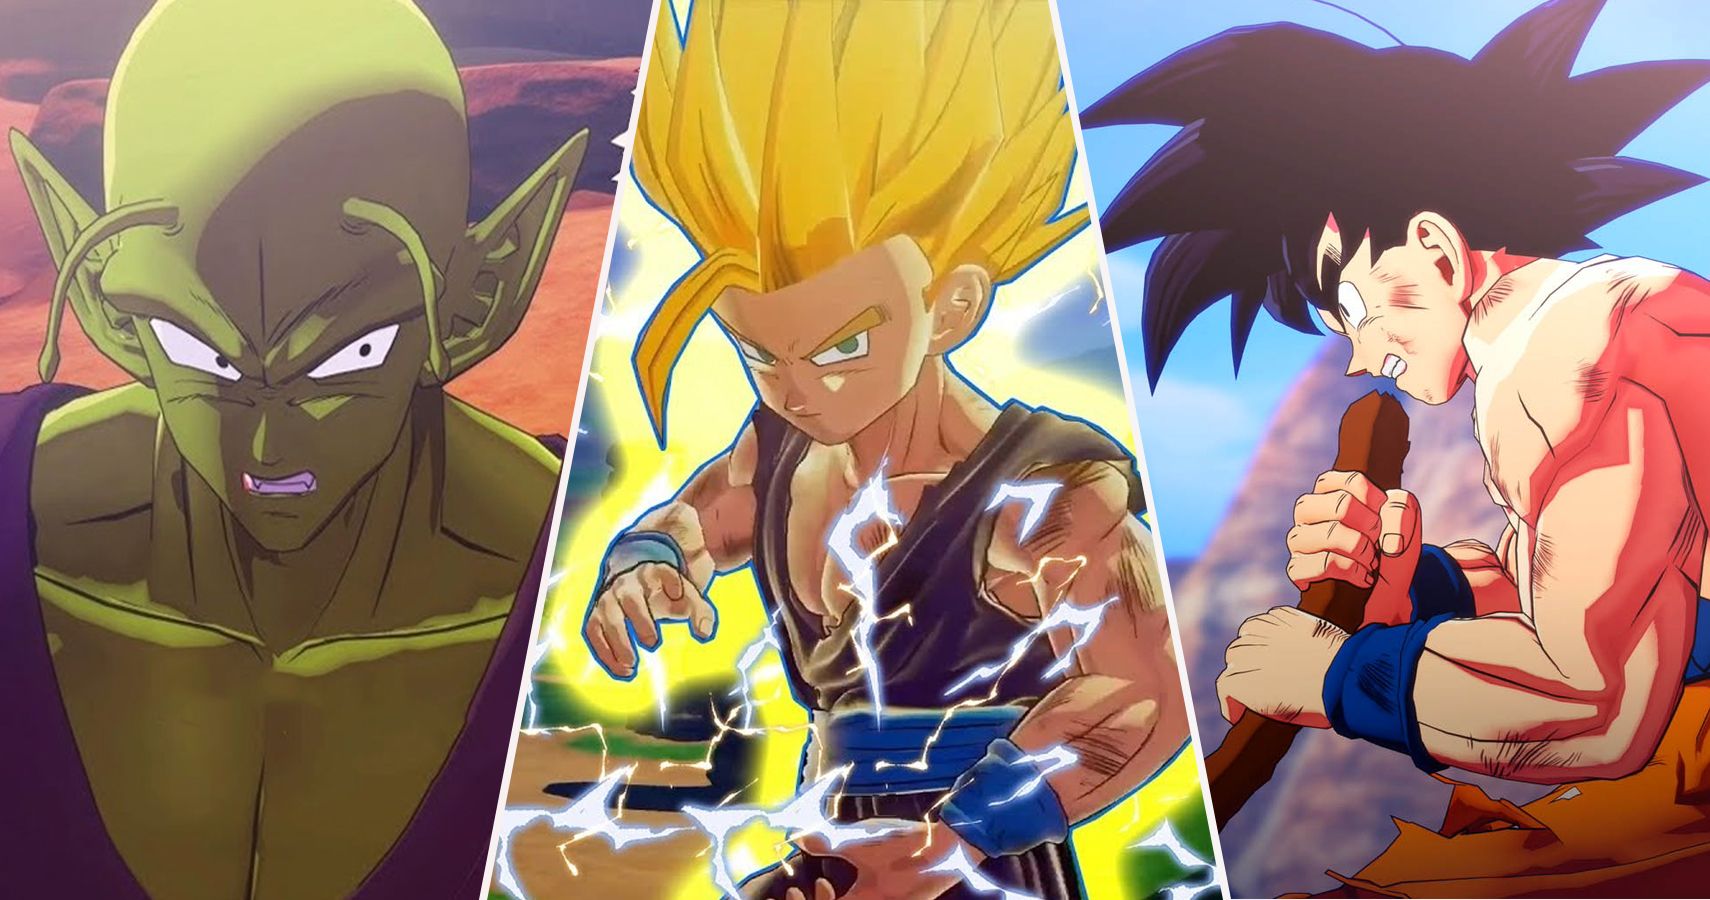 Dragon Ball Z Kakarot Every Playable Character Ranked By How Much You Get To Play Them